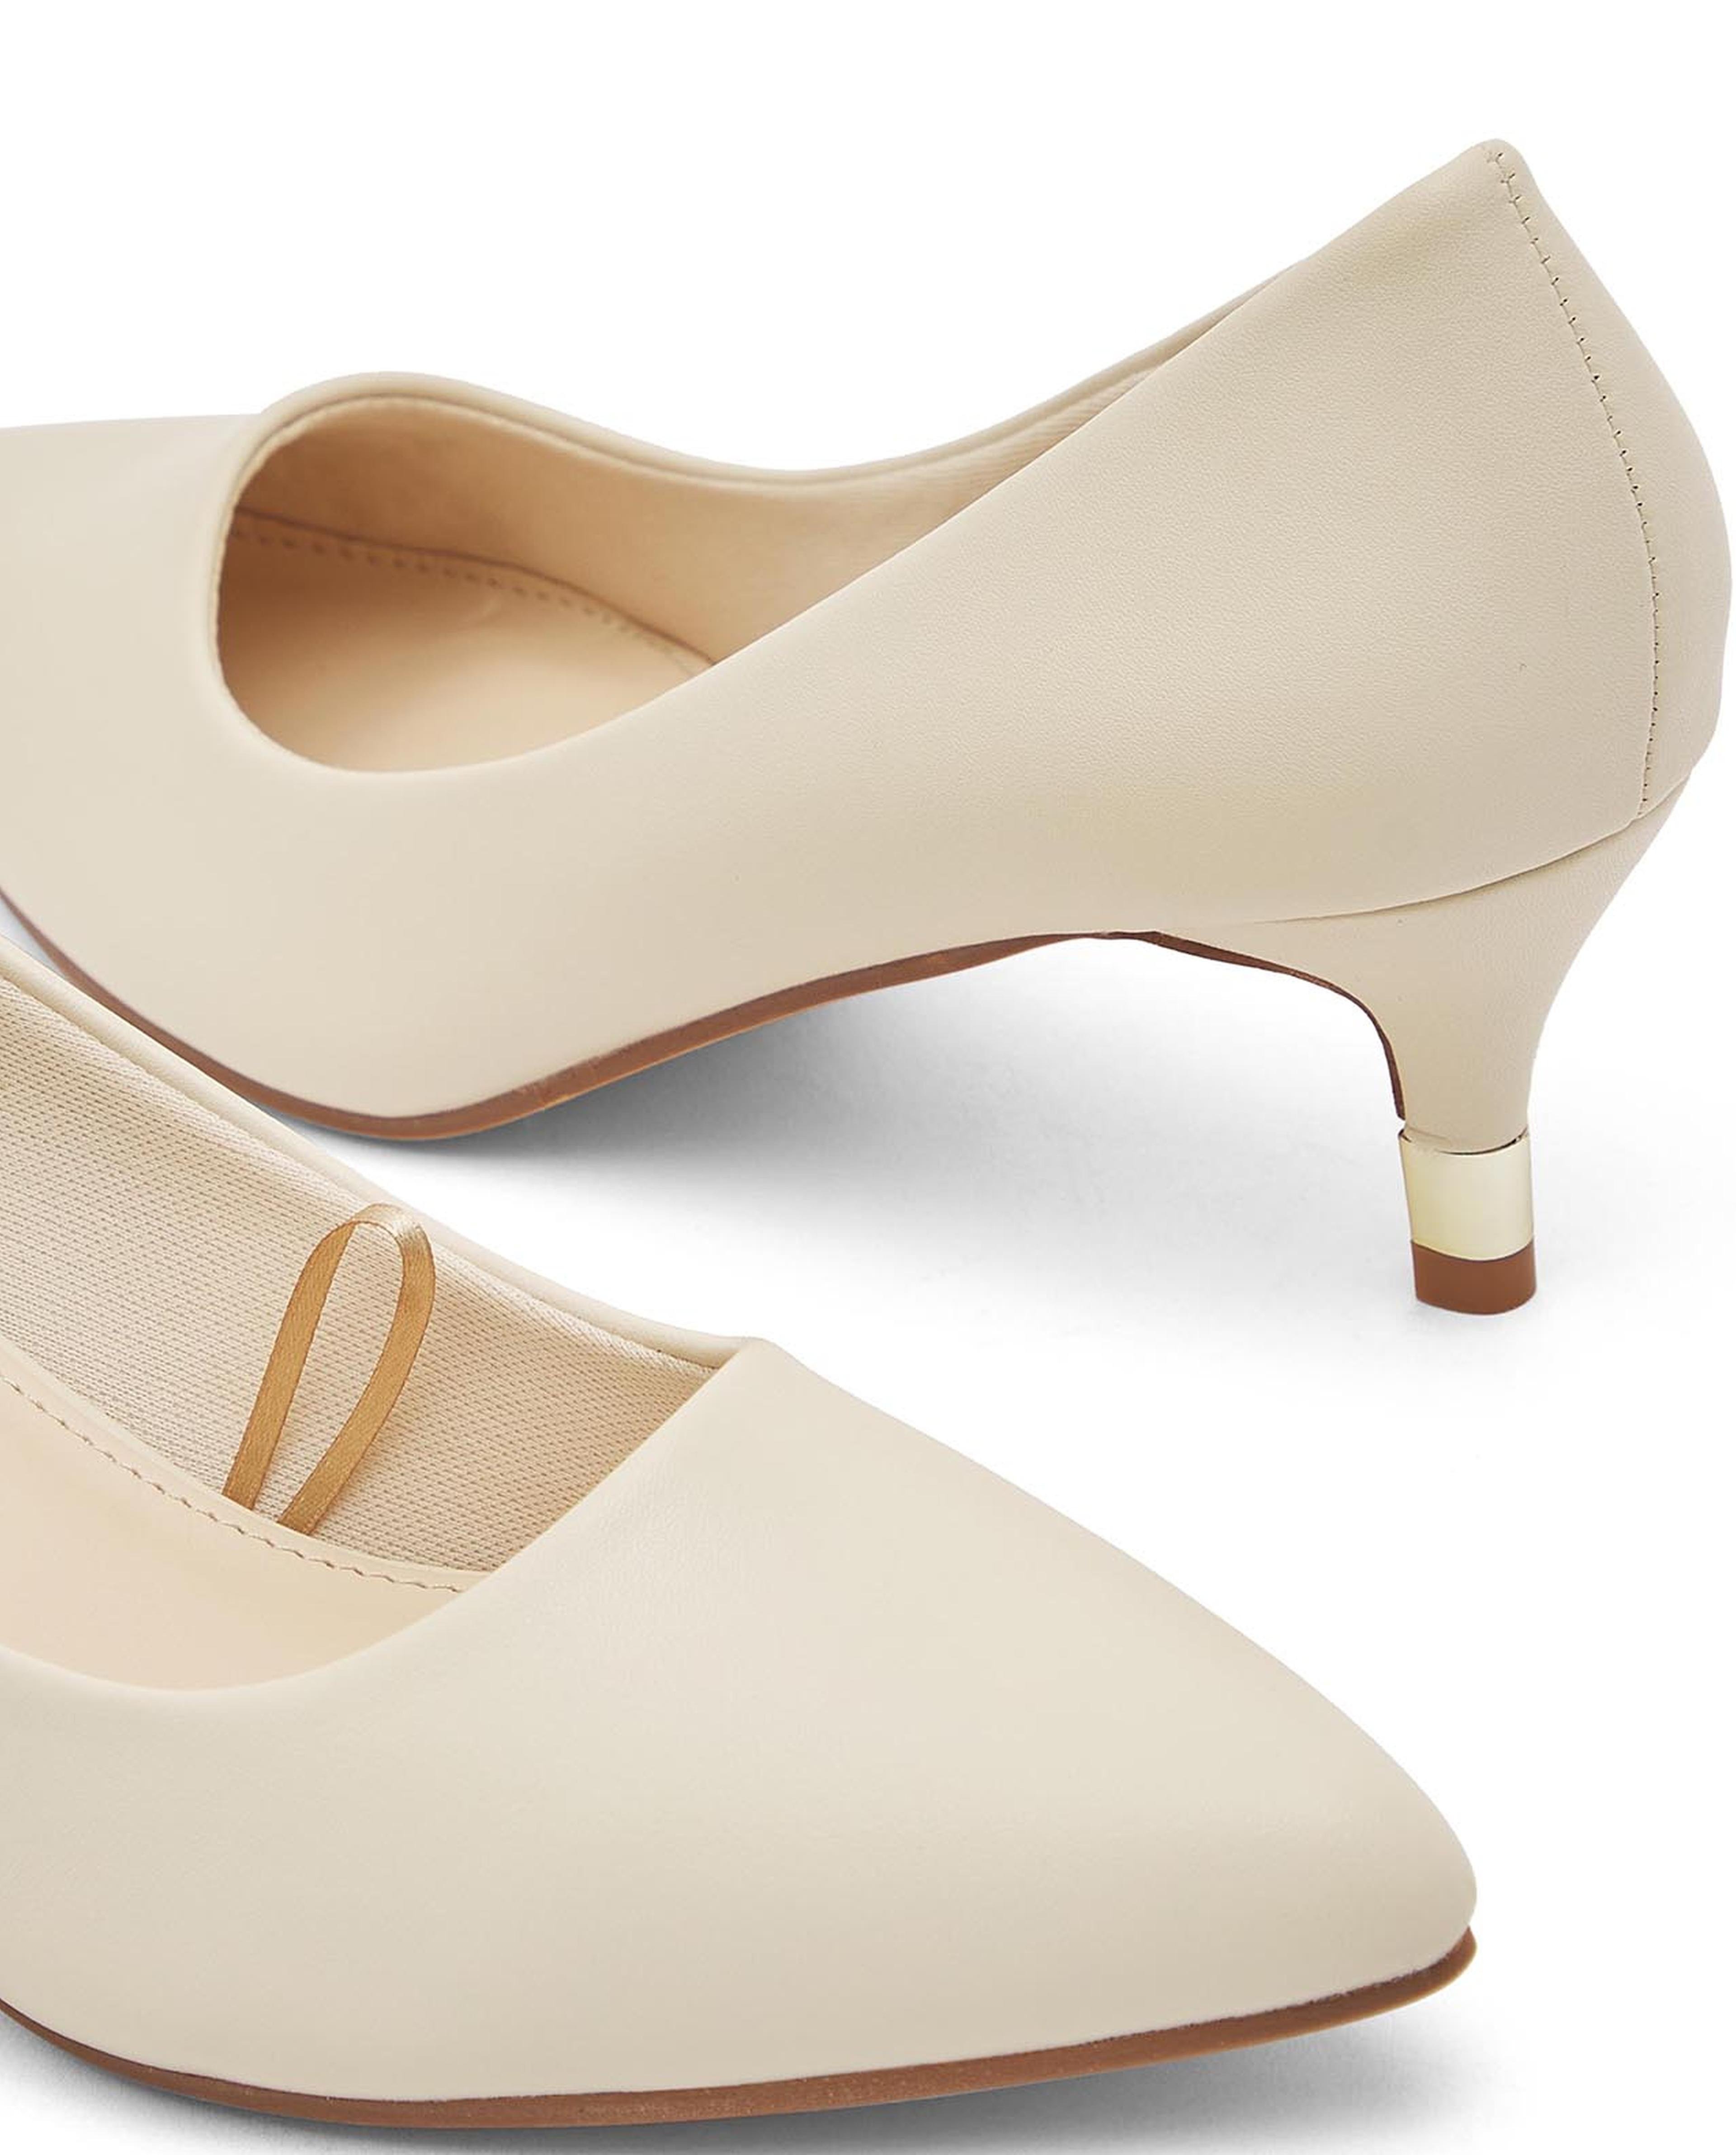 Solid Almond Toe Pumps